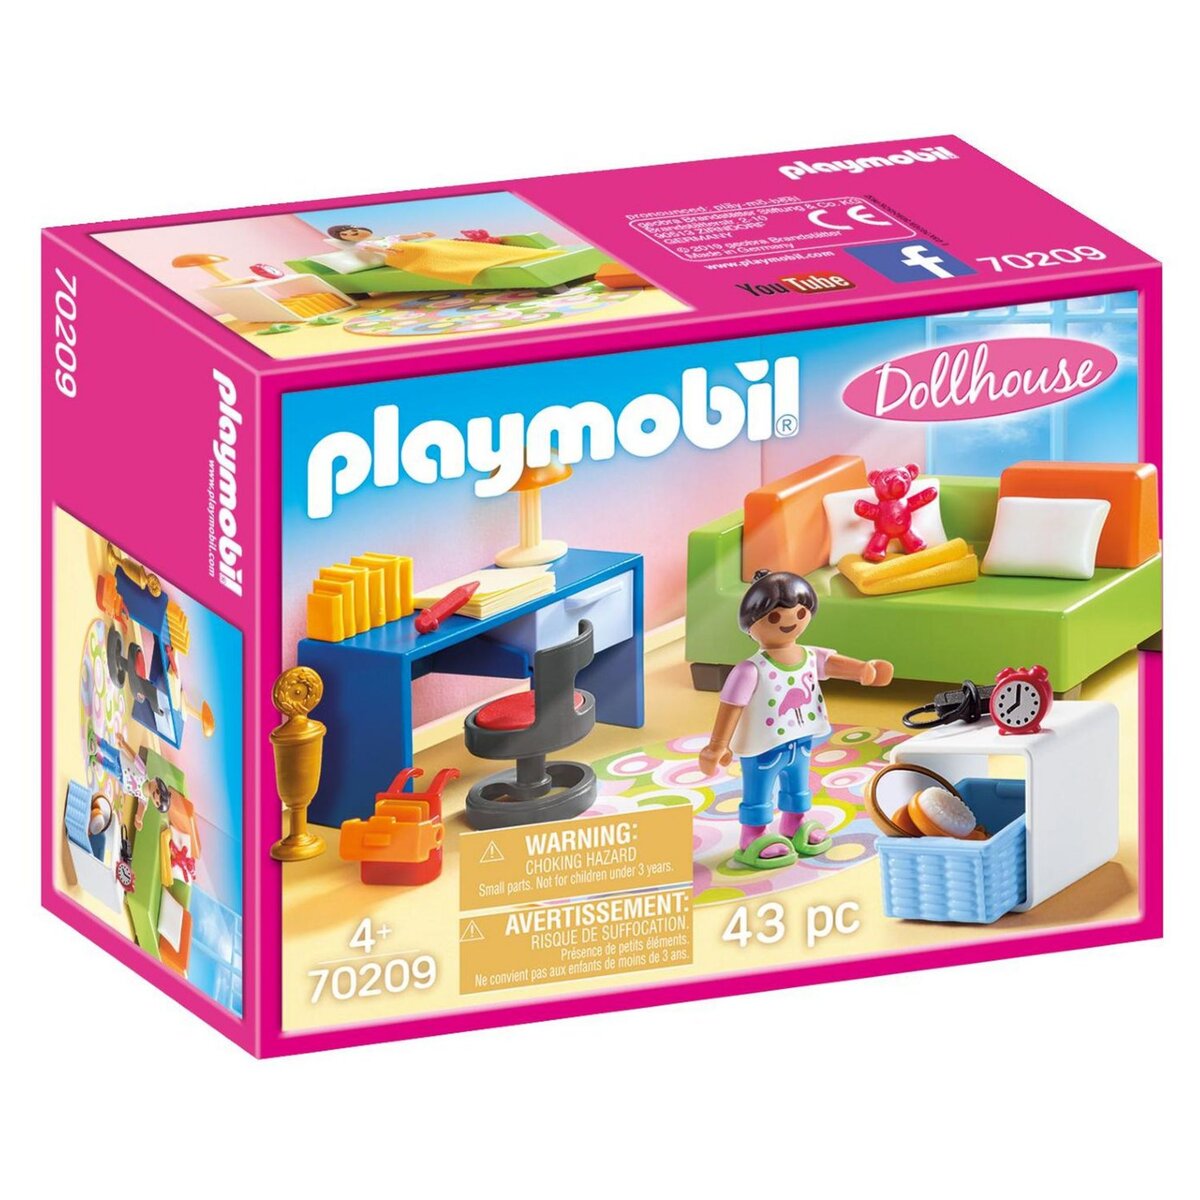 Playmobil occasion France - Vente Achat Playmobil pas cher France